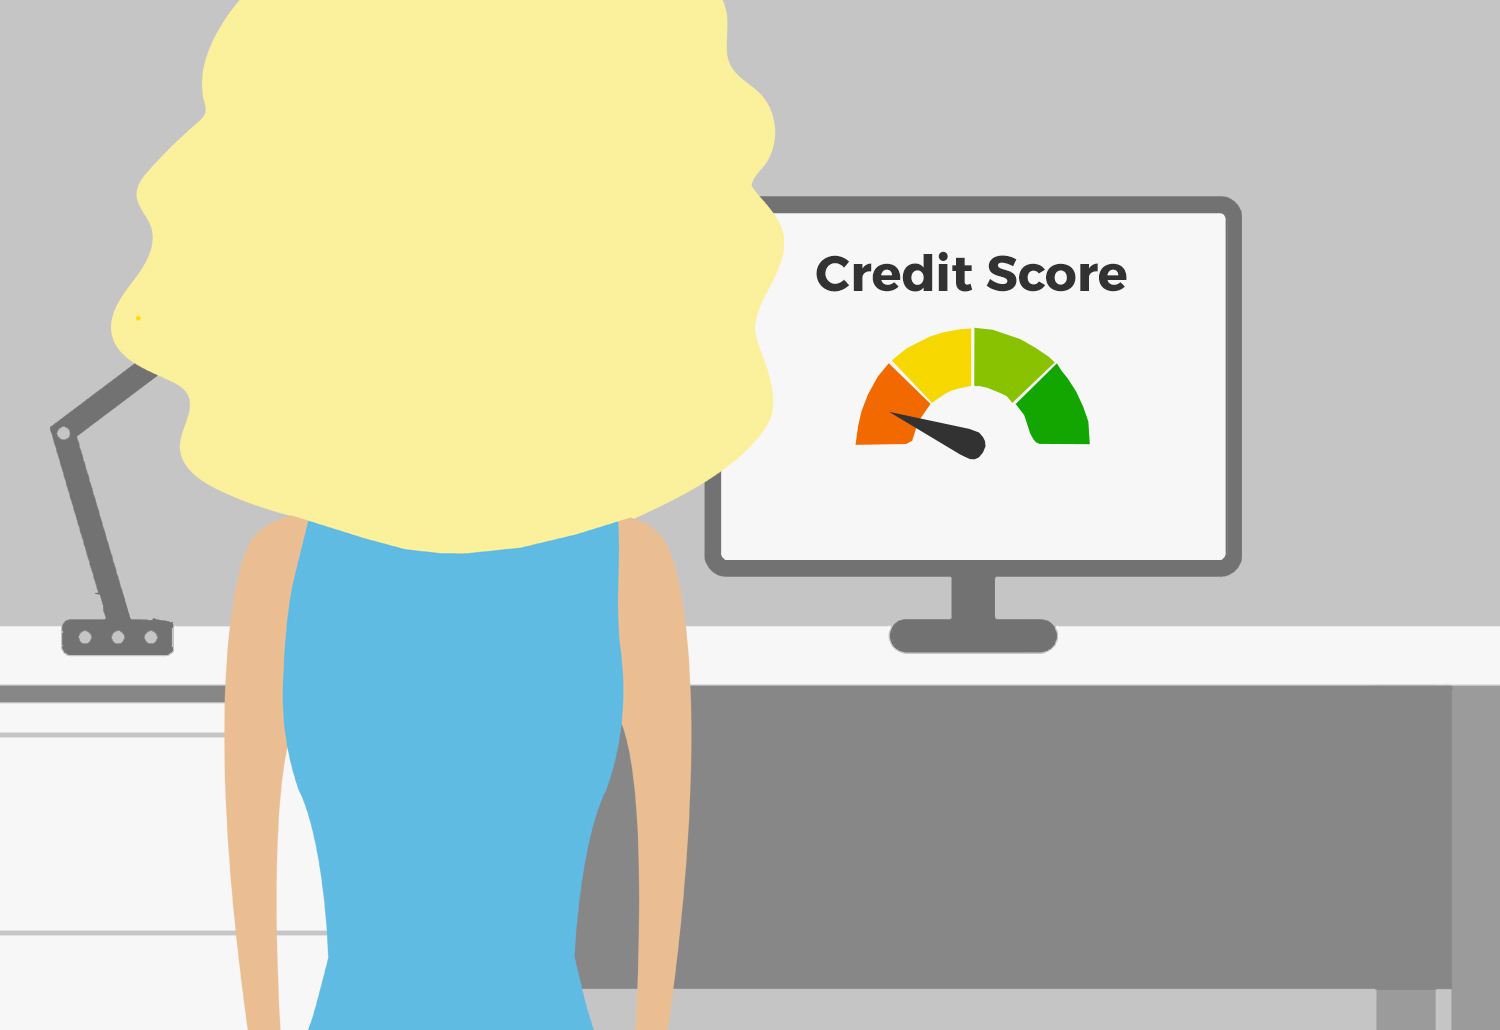 How to improve my Credit Score?